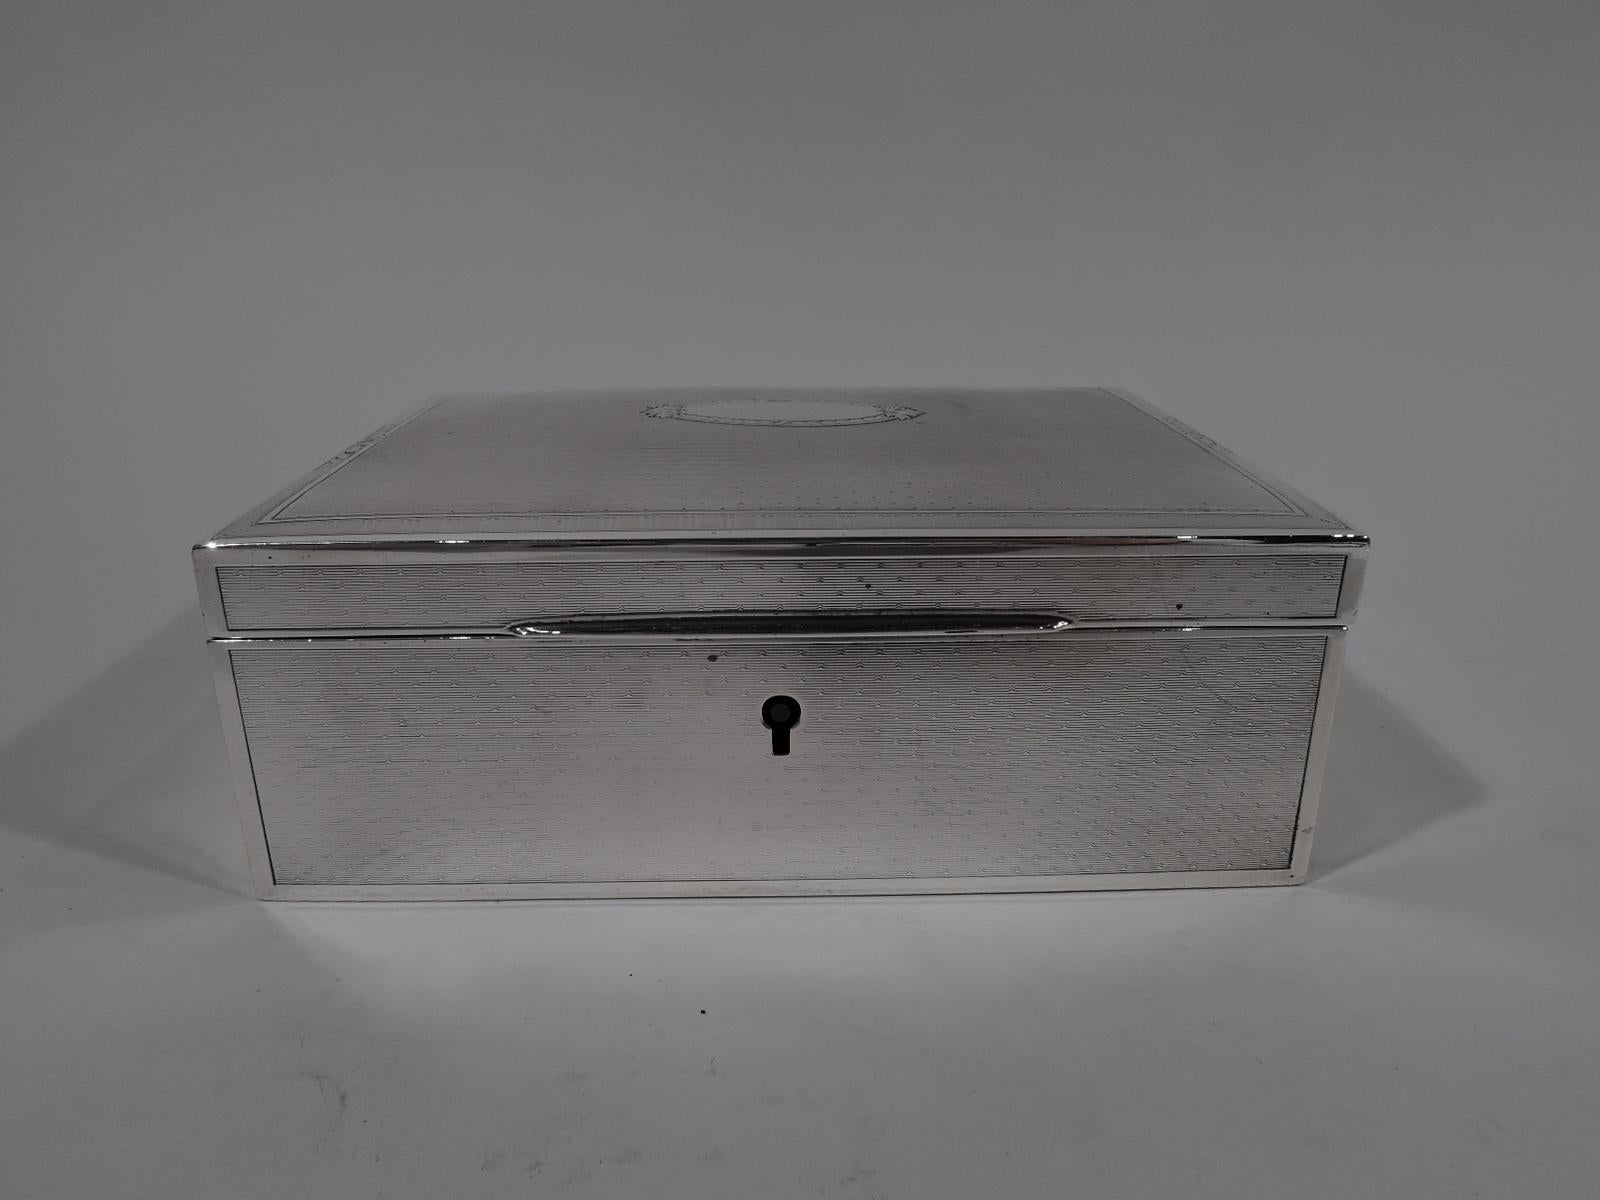 American Art Deco sterling silver jewelry box, circa 1920. Rectangular with straight sides. Cover hinged, tabbed, and gently curved. Engine turned wave ornament in plain frames. Cover top has ornamental oval frame (vacant). Fully marked with maker’s